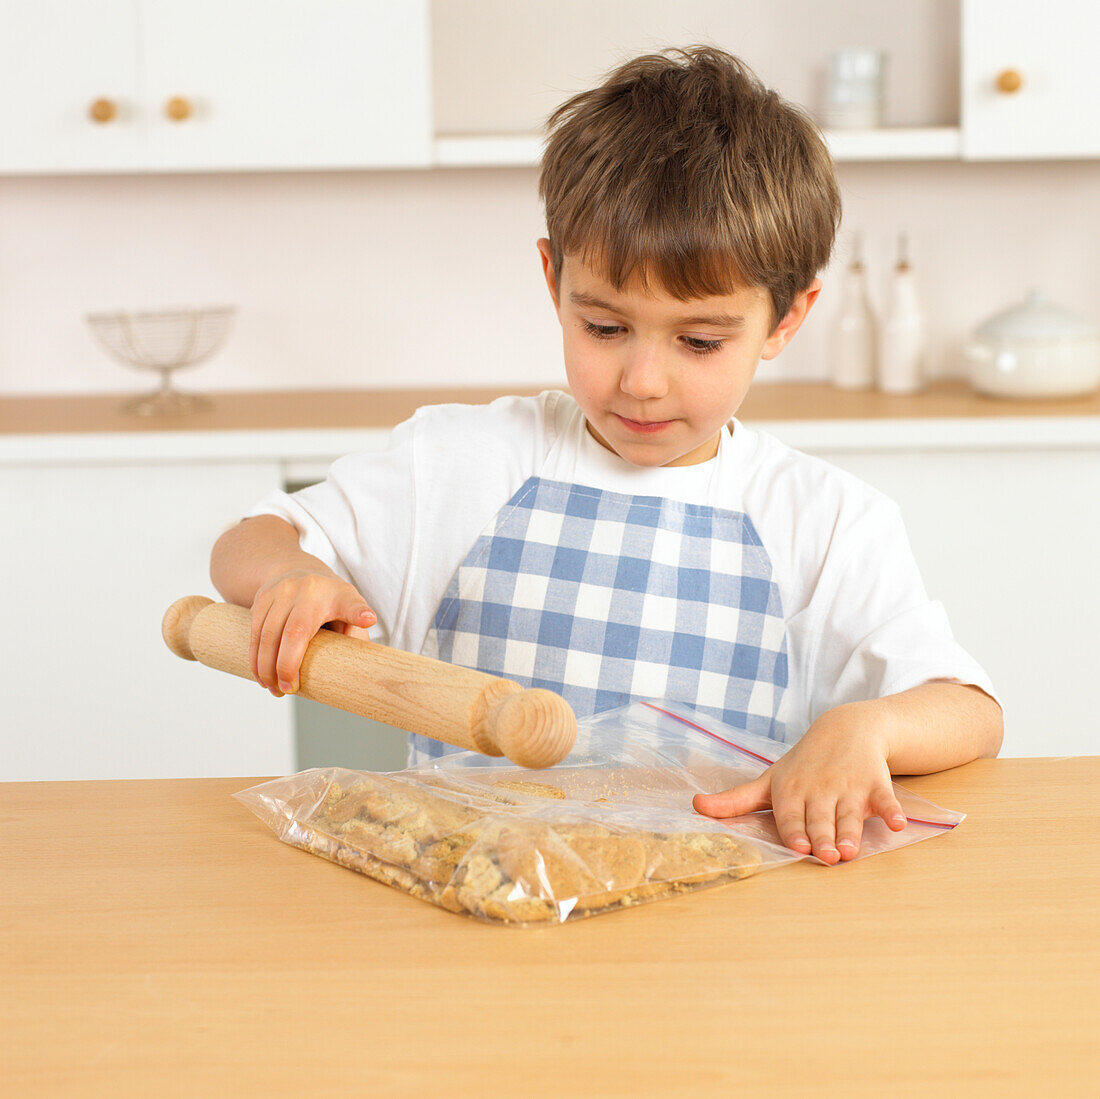 Boy holding rolling pin above bag of biscuits